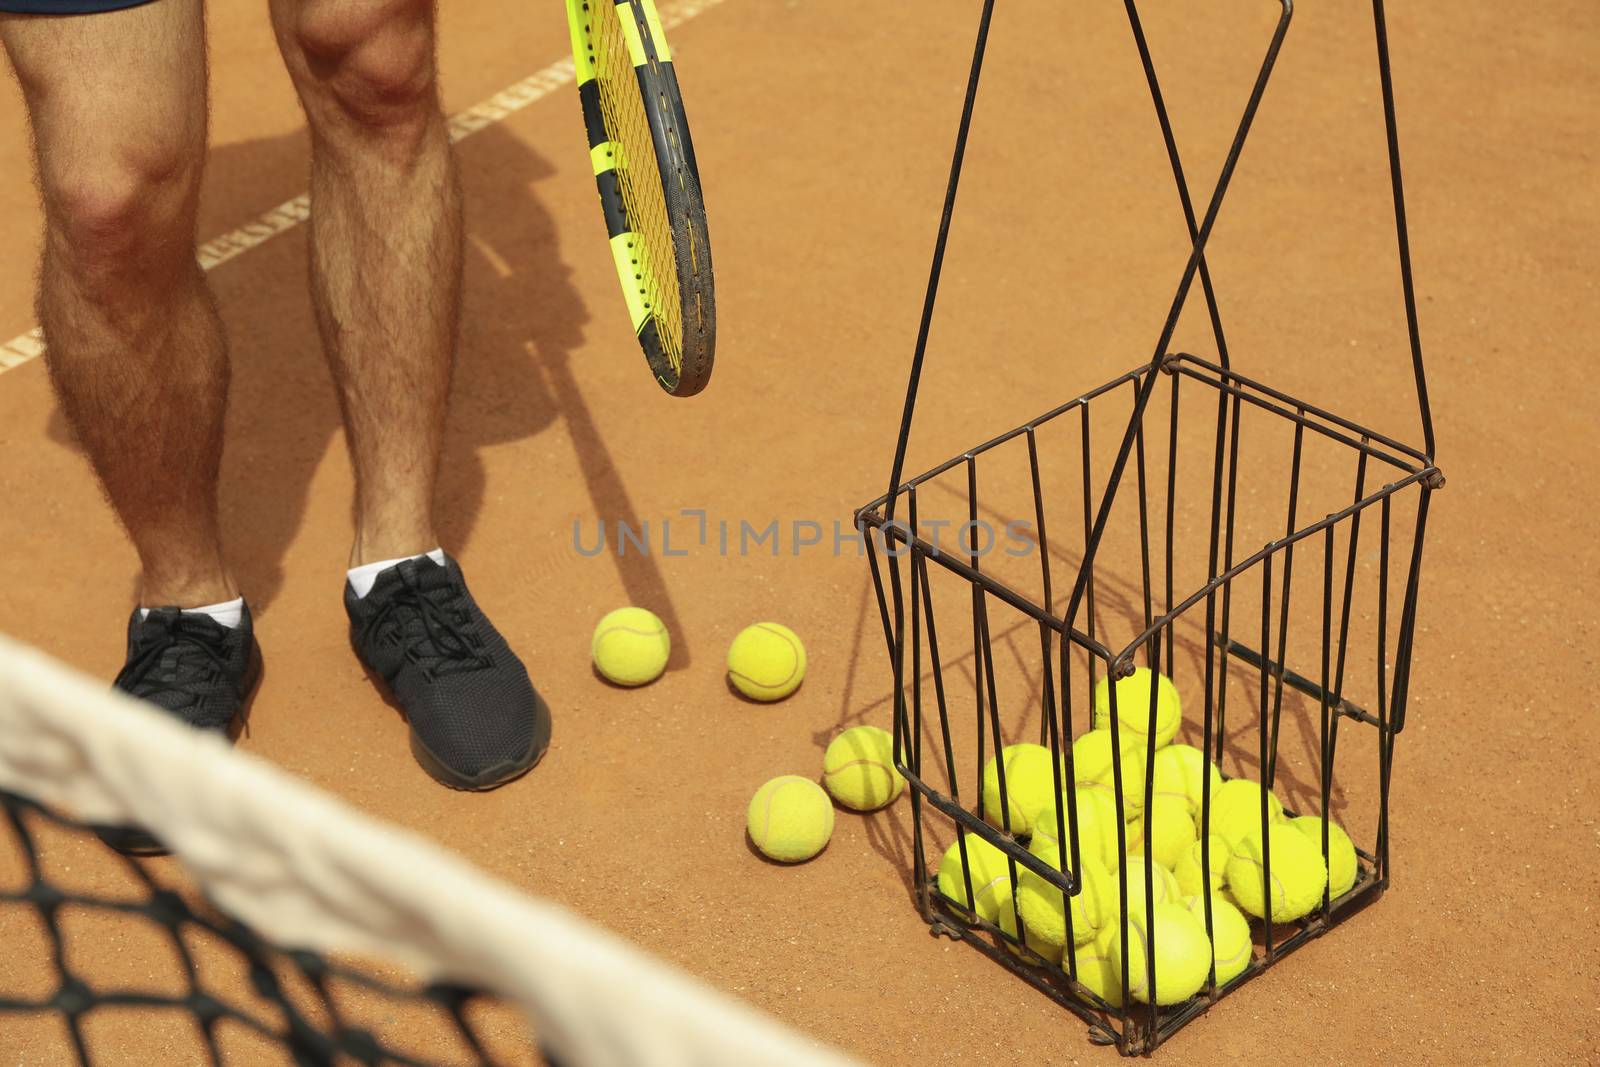 Man hold racket on clay court with basket of tennis balls